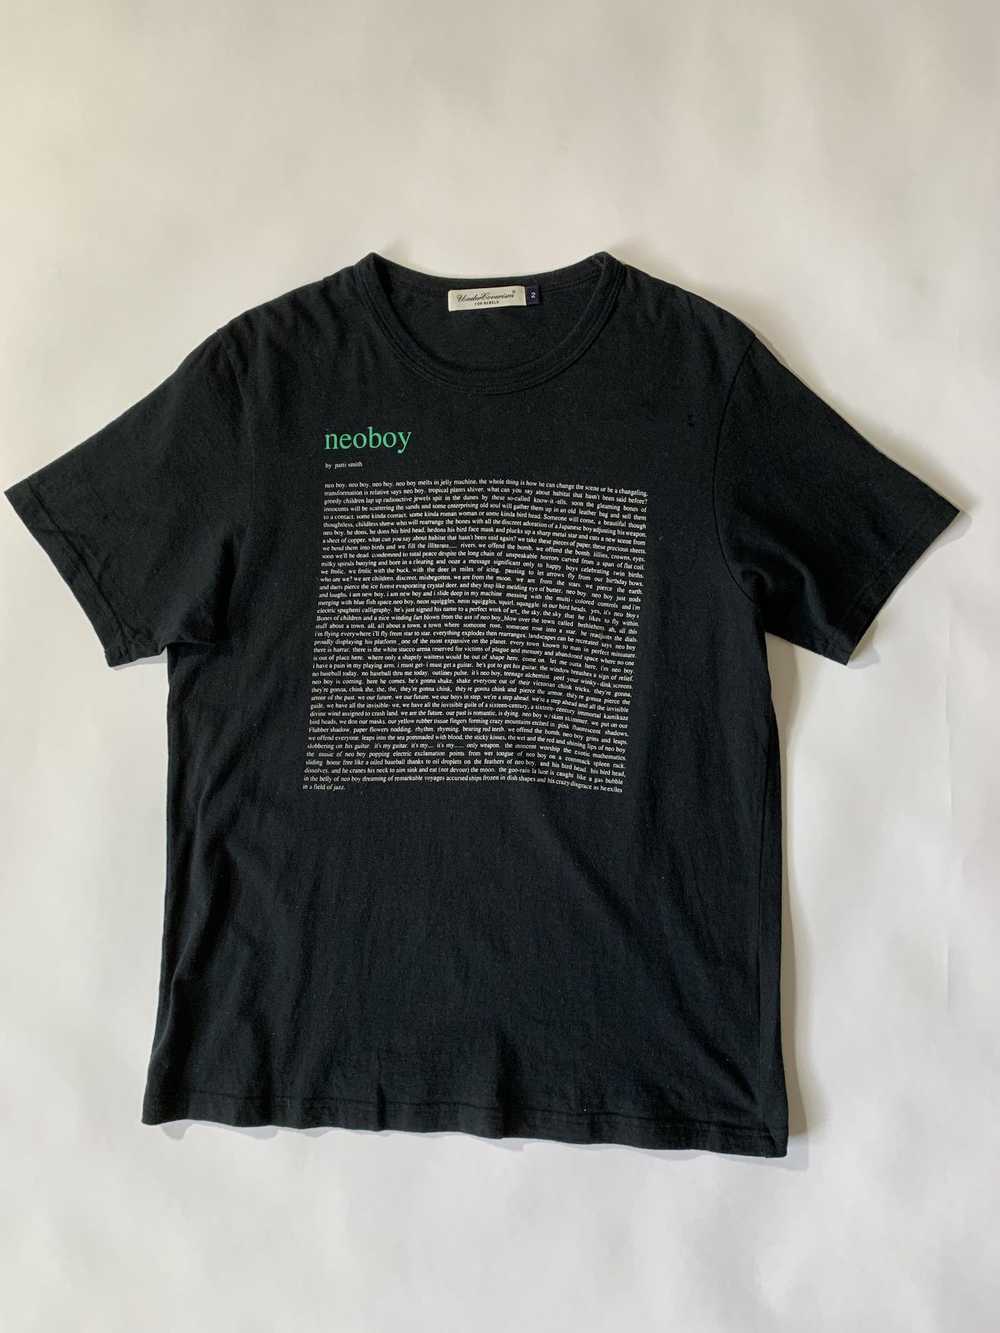 Undercover SS09 Neoboy Patti Smith Poem Tee - image 1